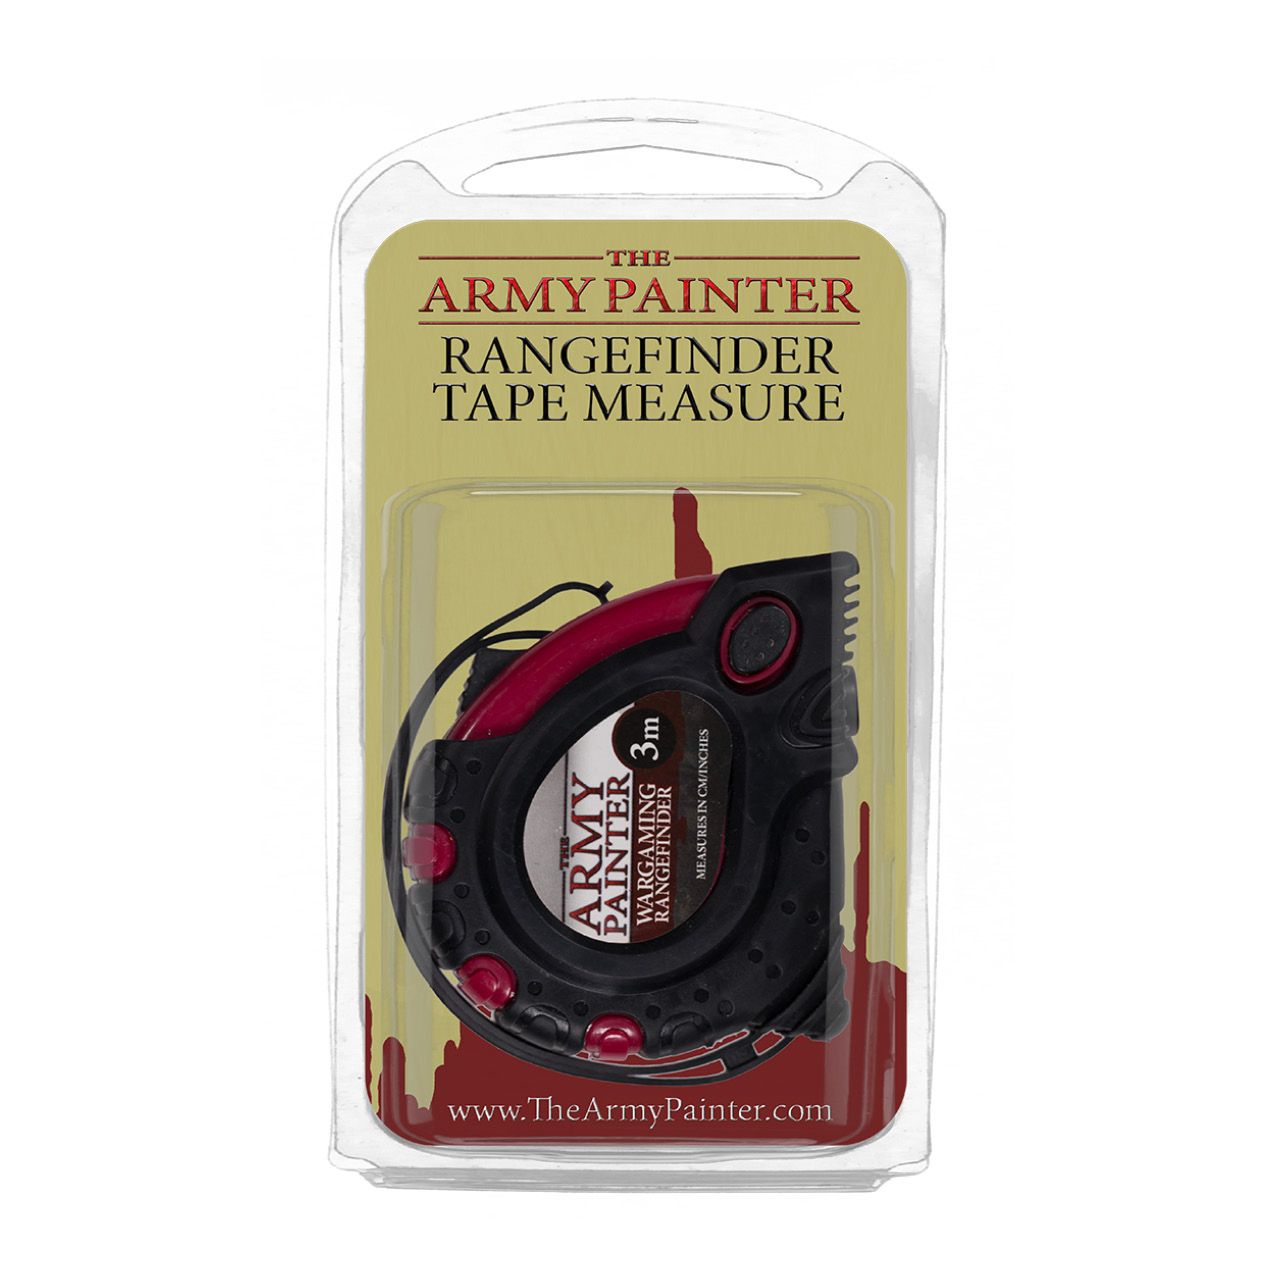 RANGEFINDER TAPE MEASURE - TL5047 - The Army Painter